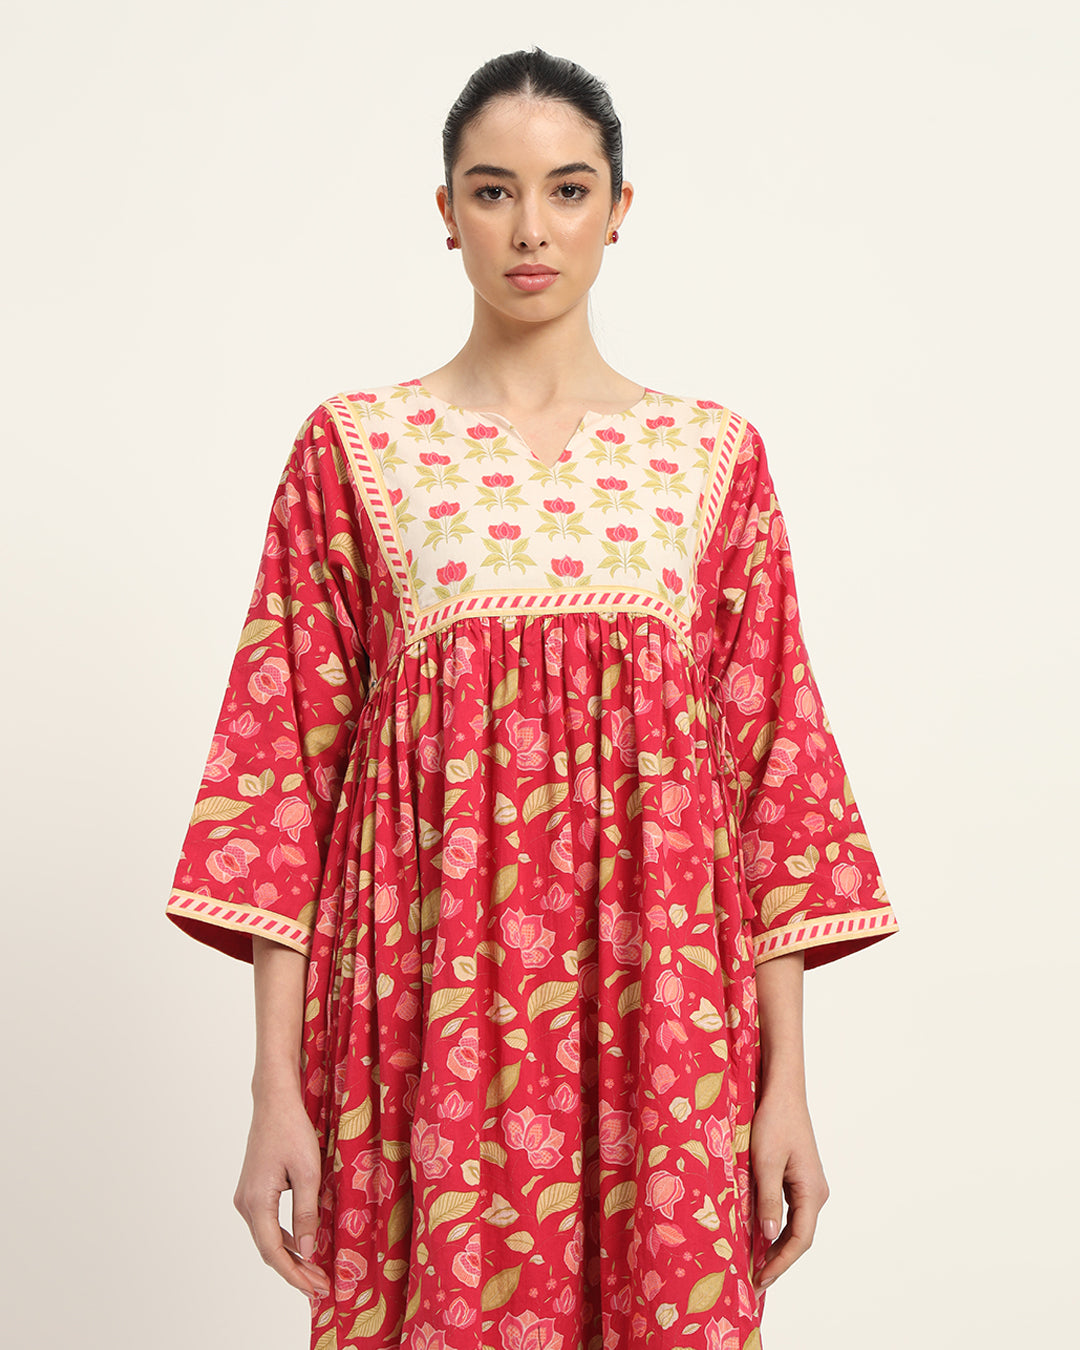 Whimsical Wild Blooms Notch Neck Dress